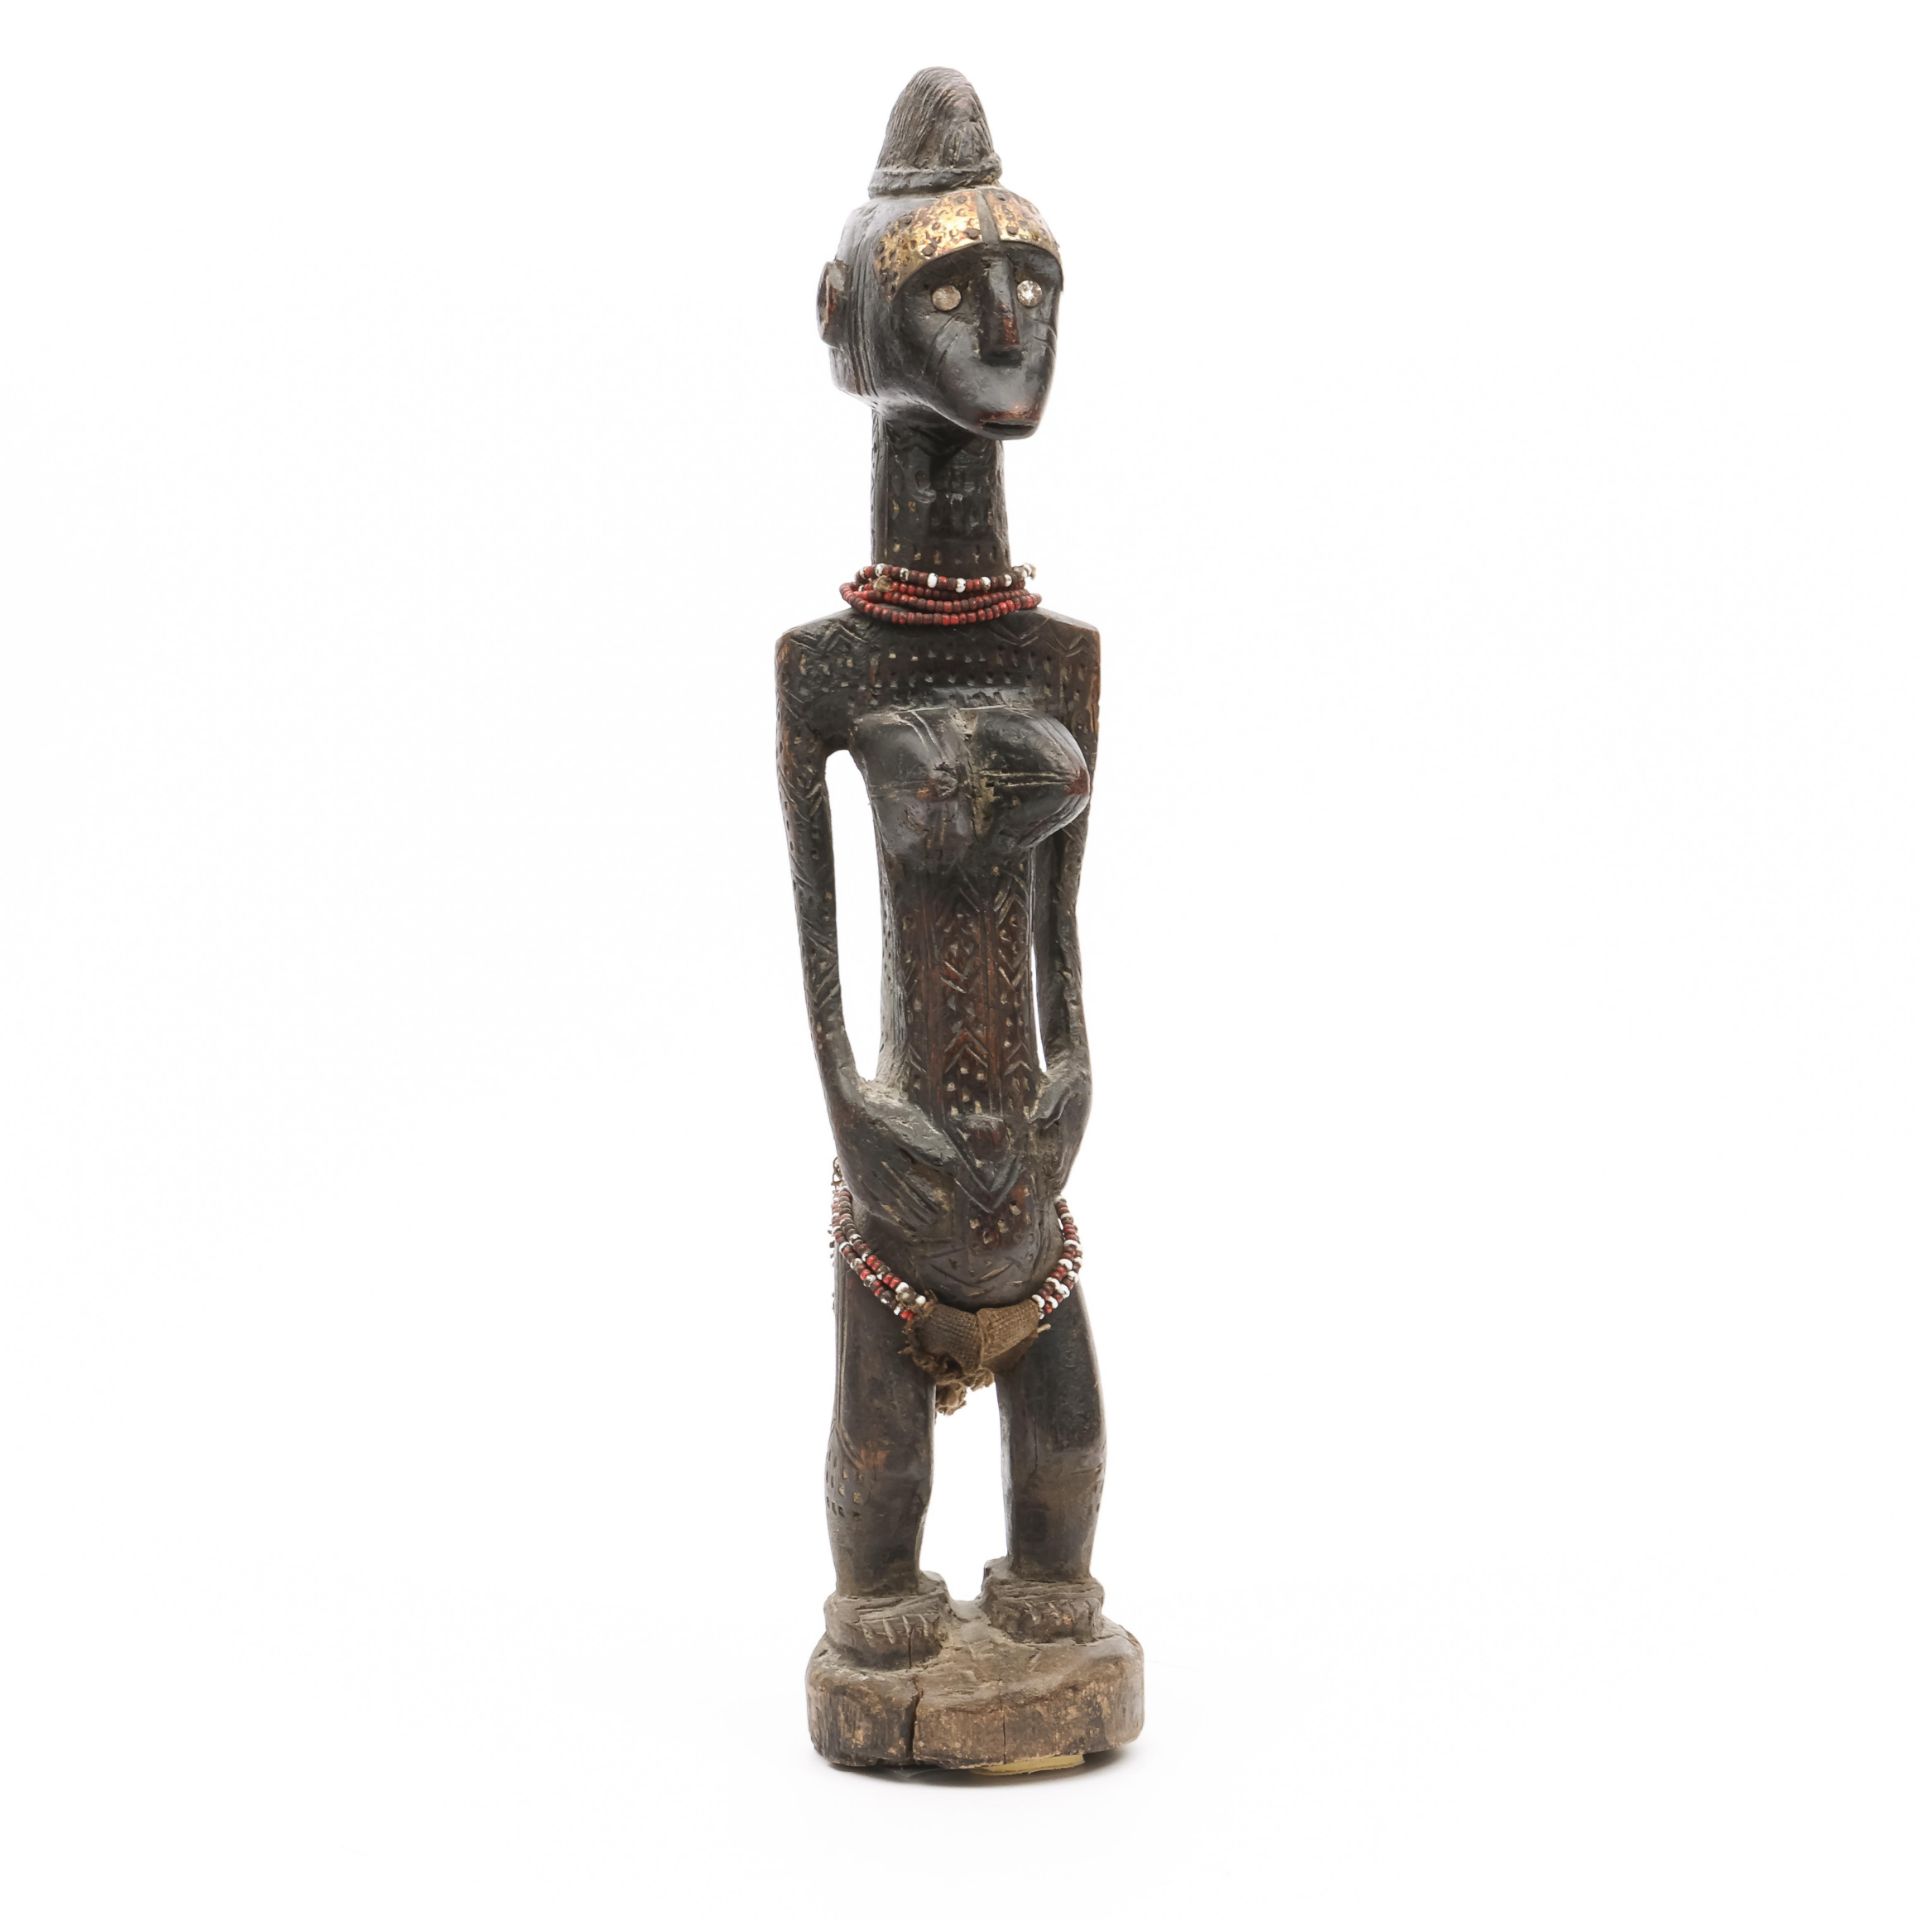 A standing female figure in Bambara style.